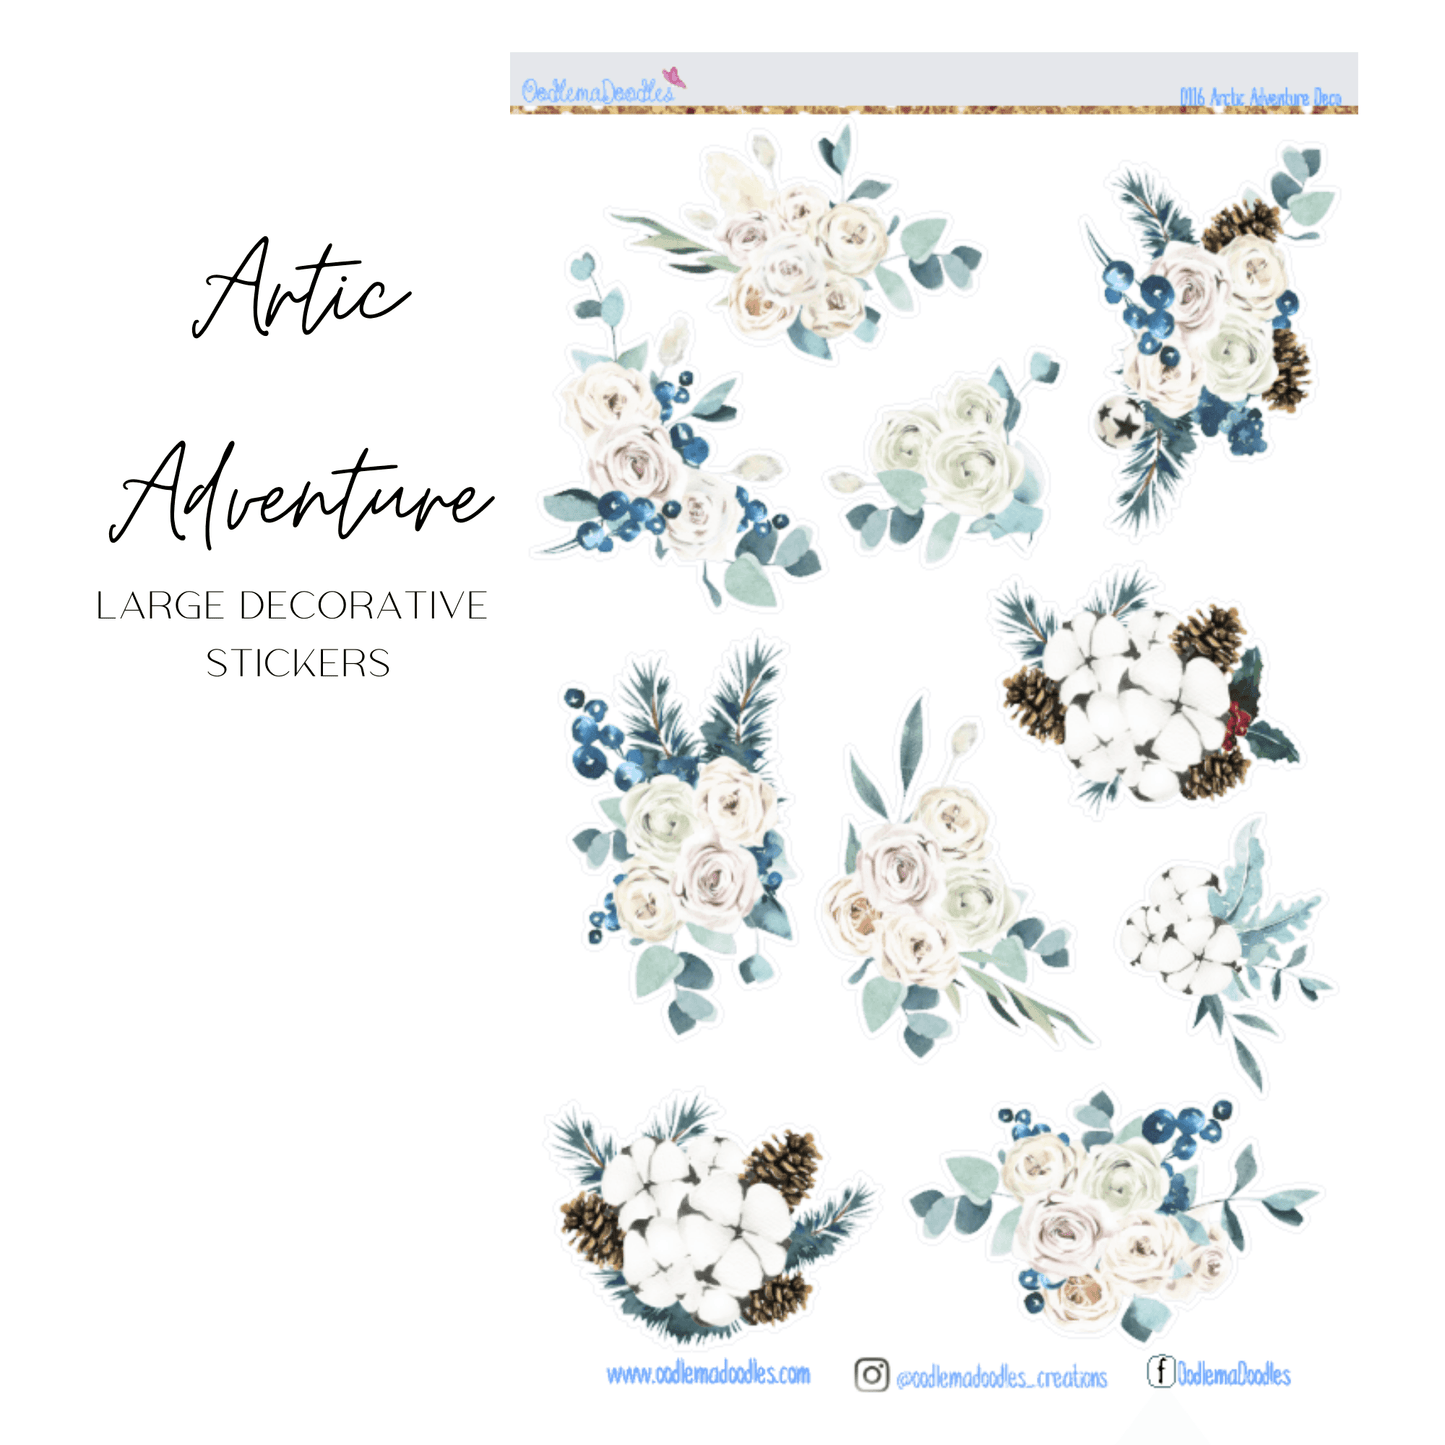 Arctic Adventure Decorative Stickers - oodlemadoodles